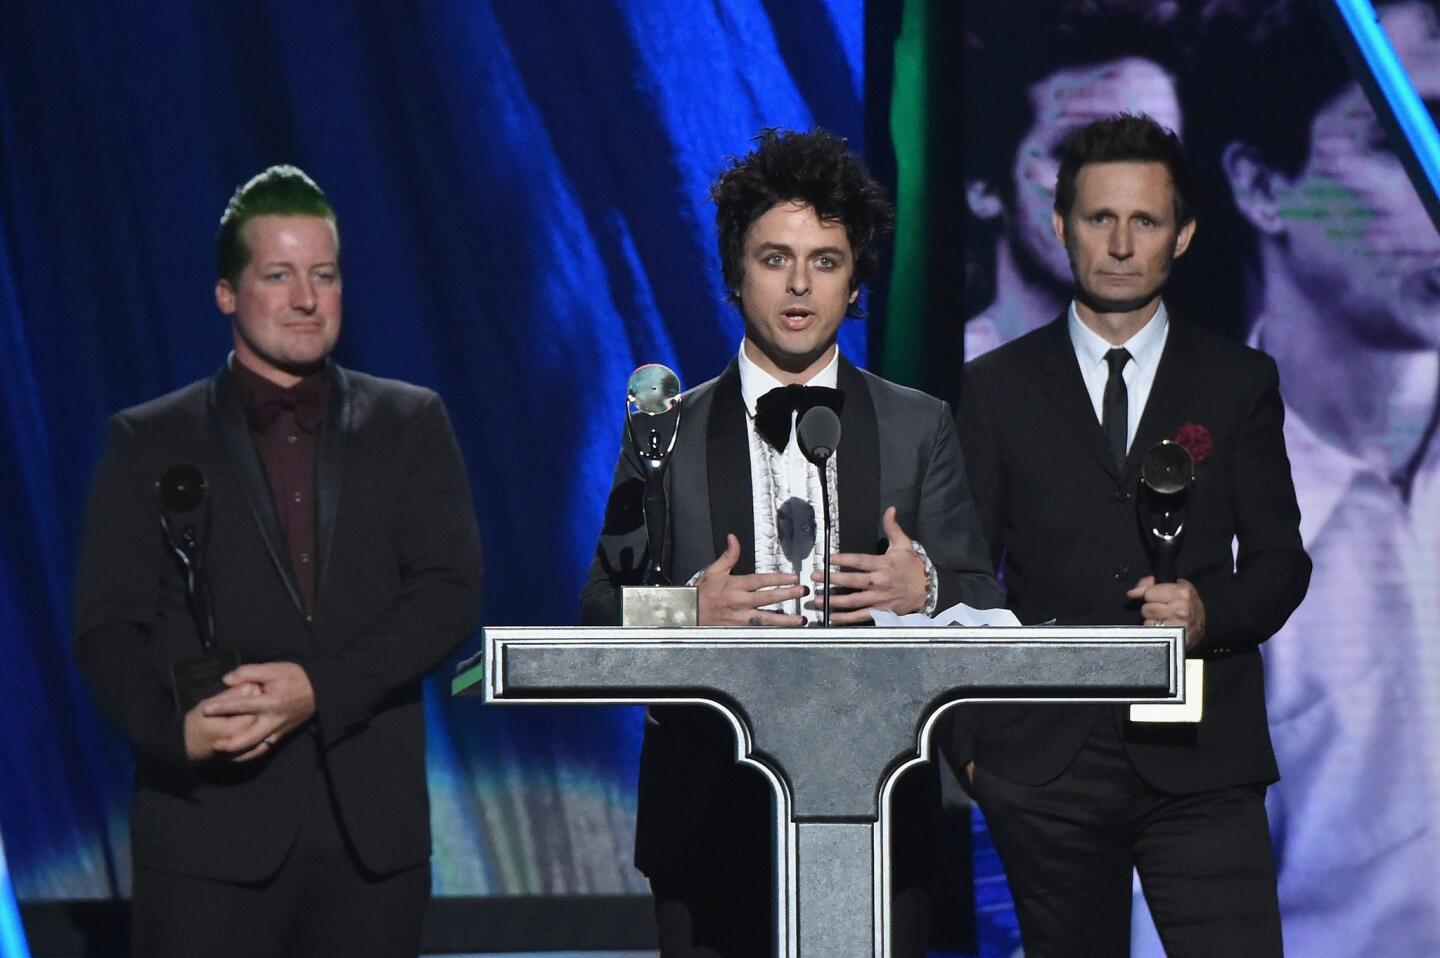 Rock Hall of Fame Induction Ceremony 2015